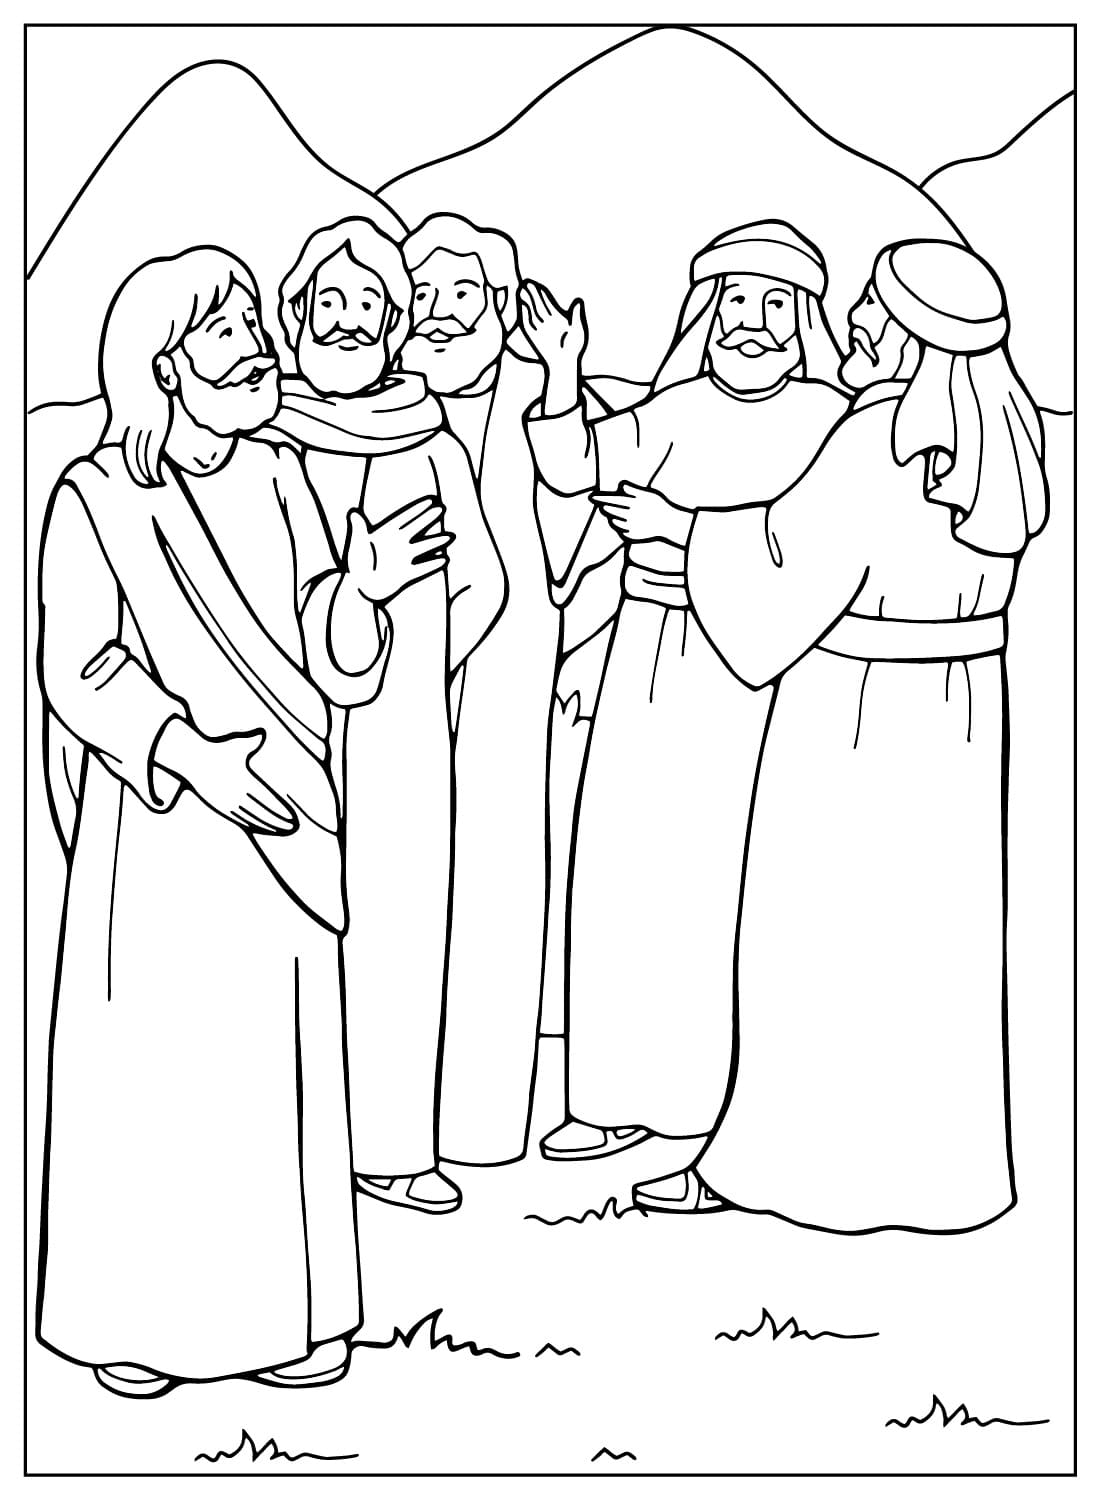 Jesus Chooses His First Disciples Coloring Page from Jesus